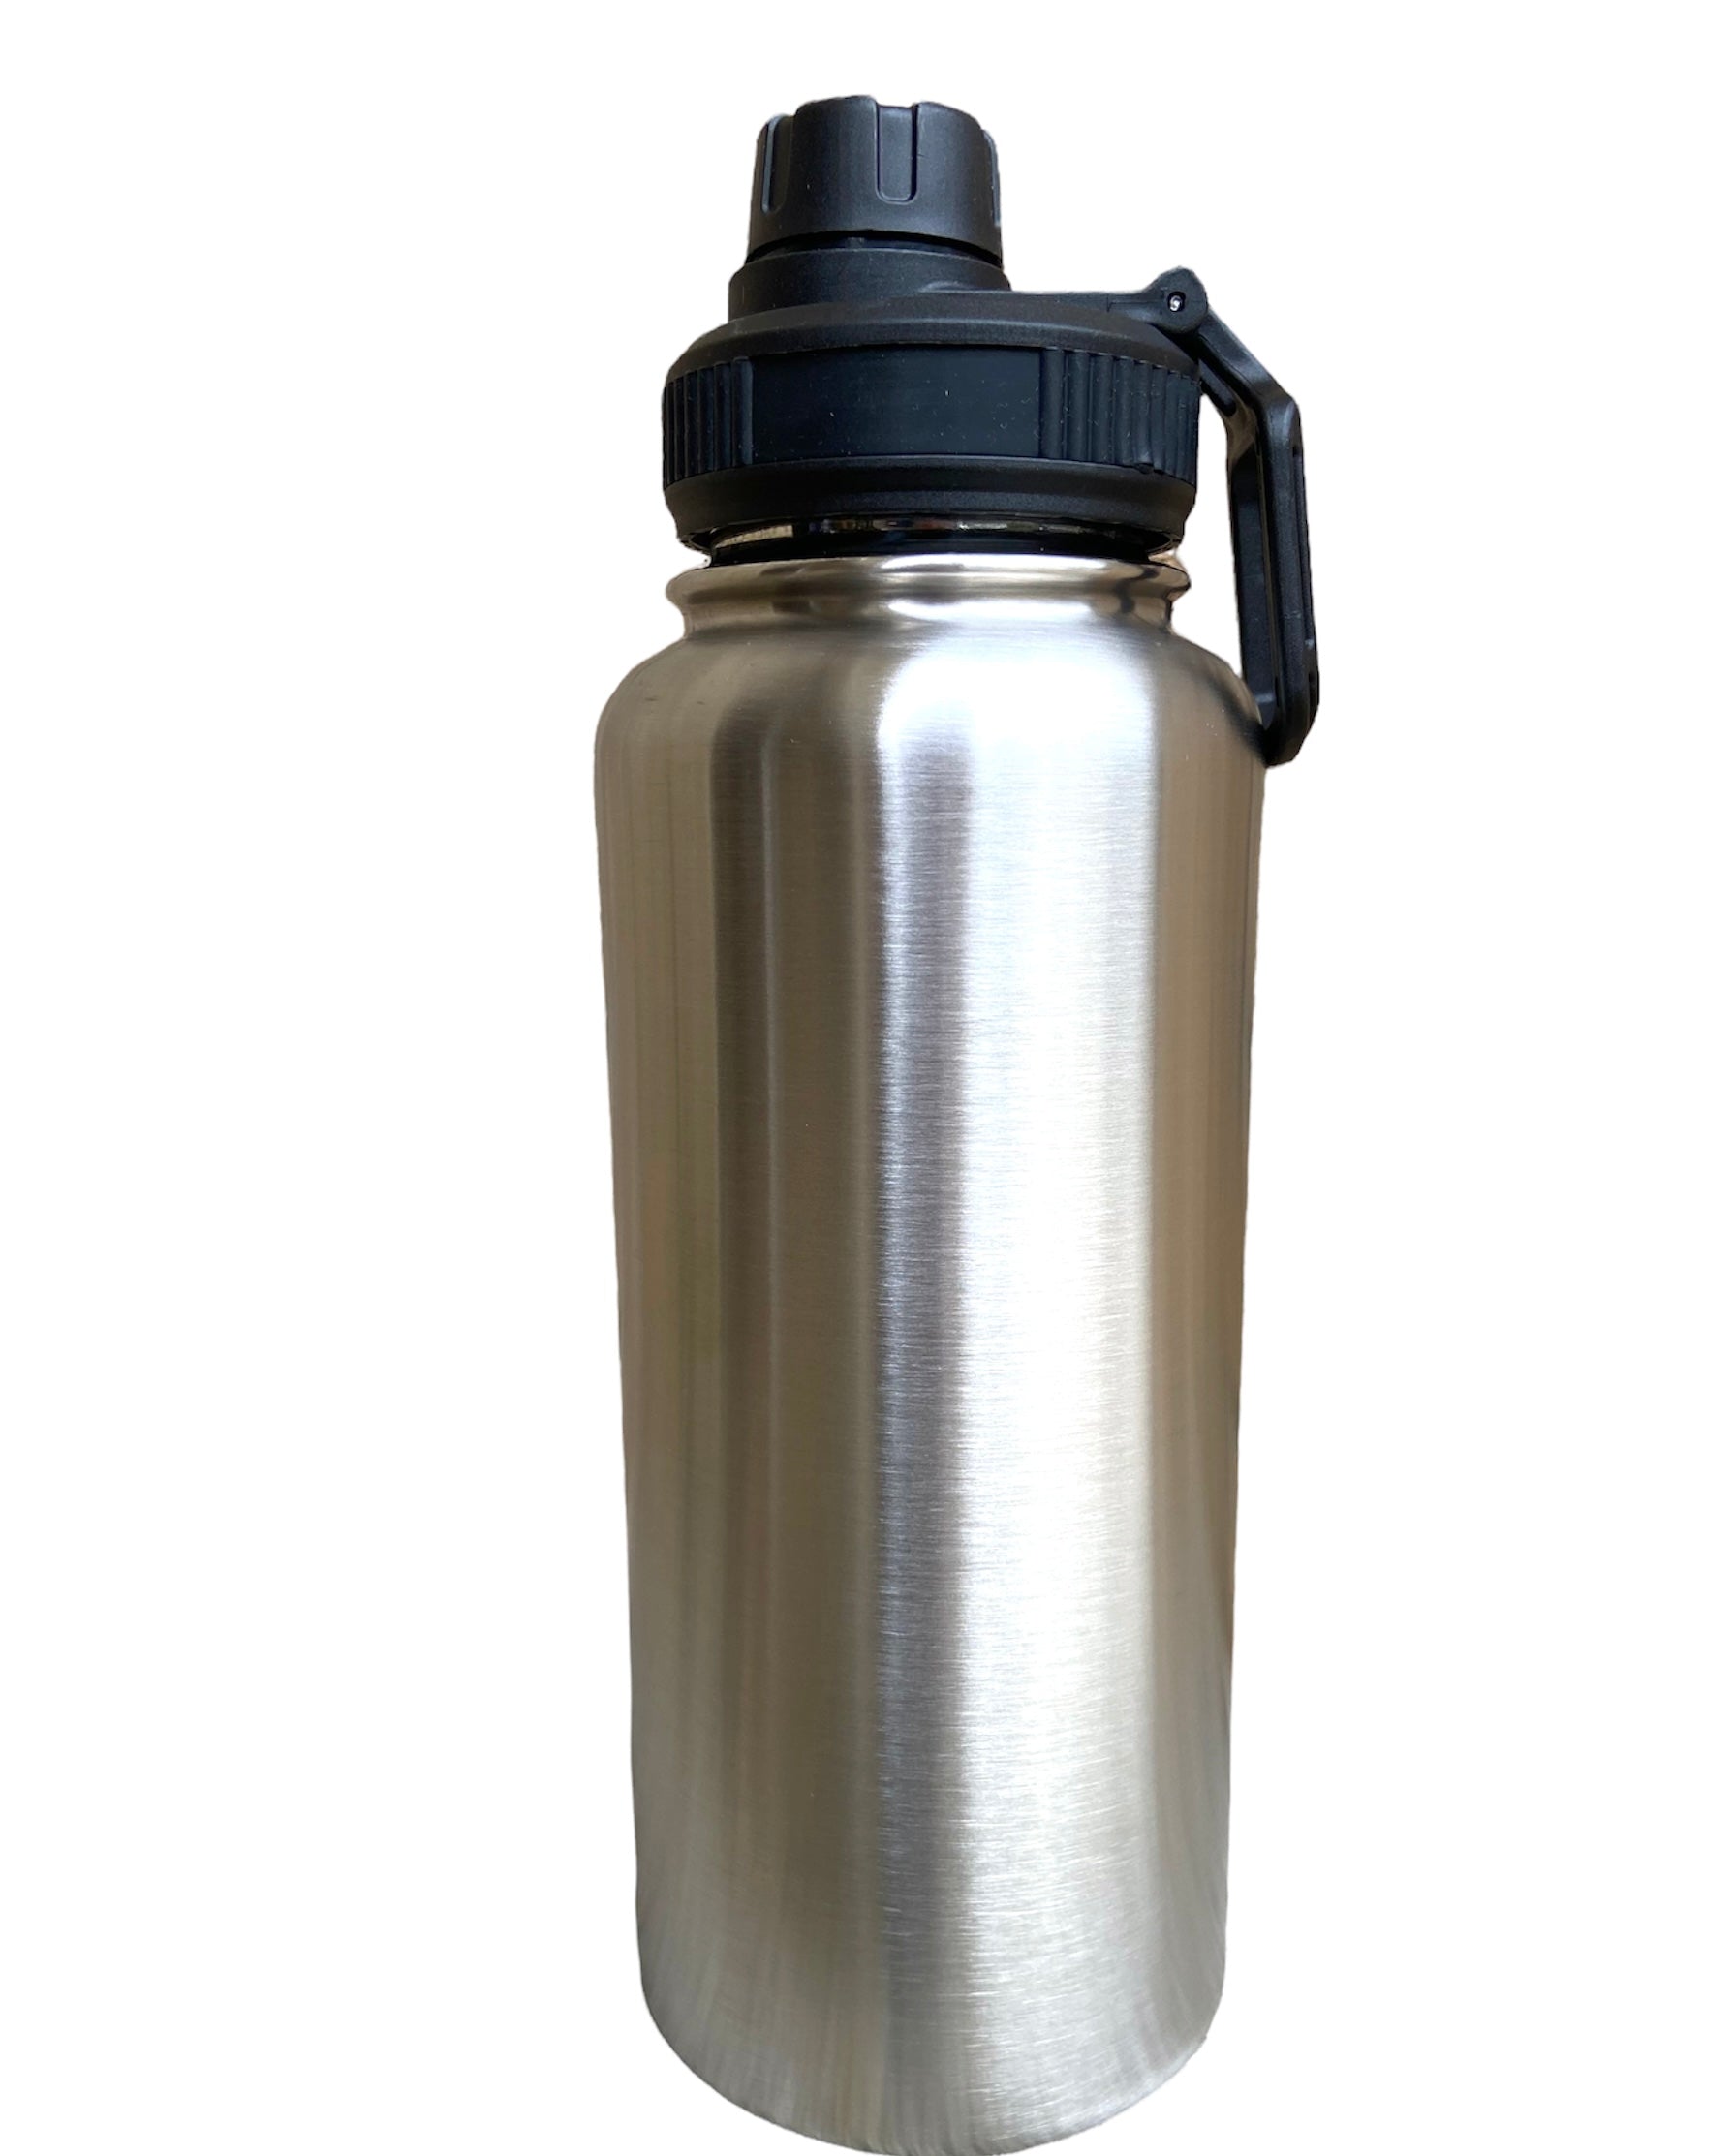 24 oz hydro flask tumbler sstainless steel with black screw top lid